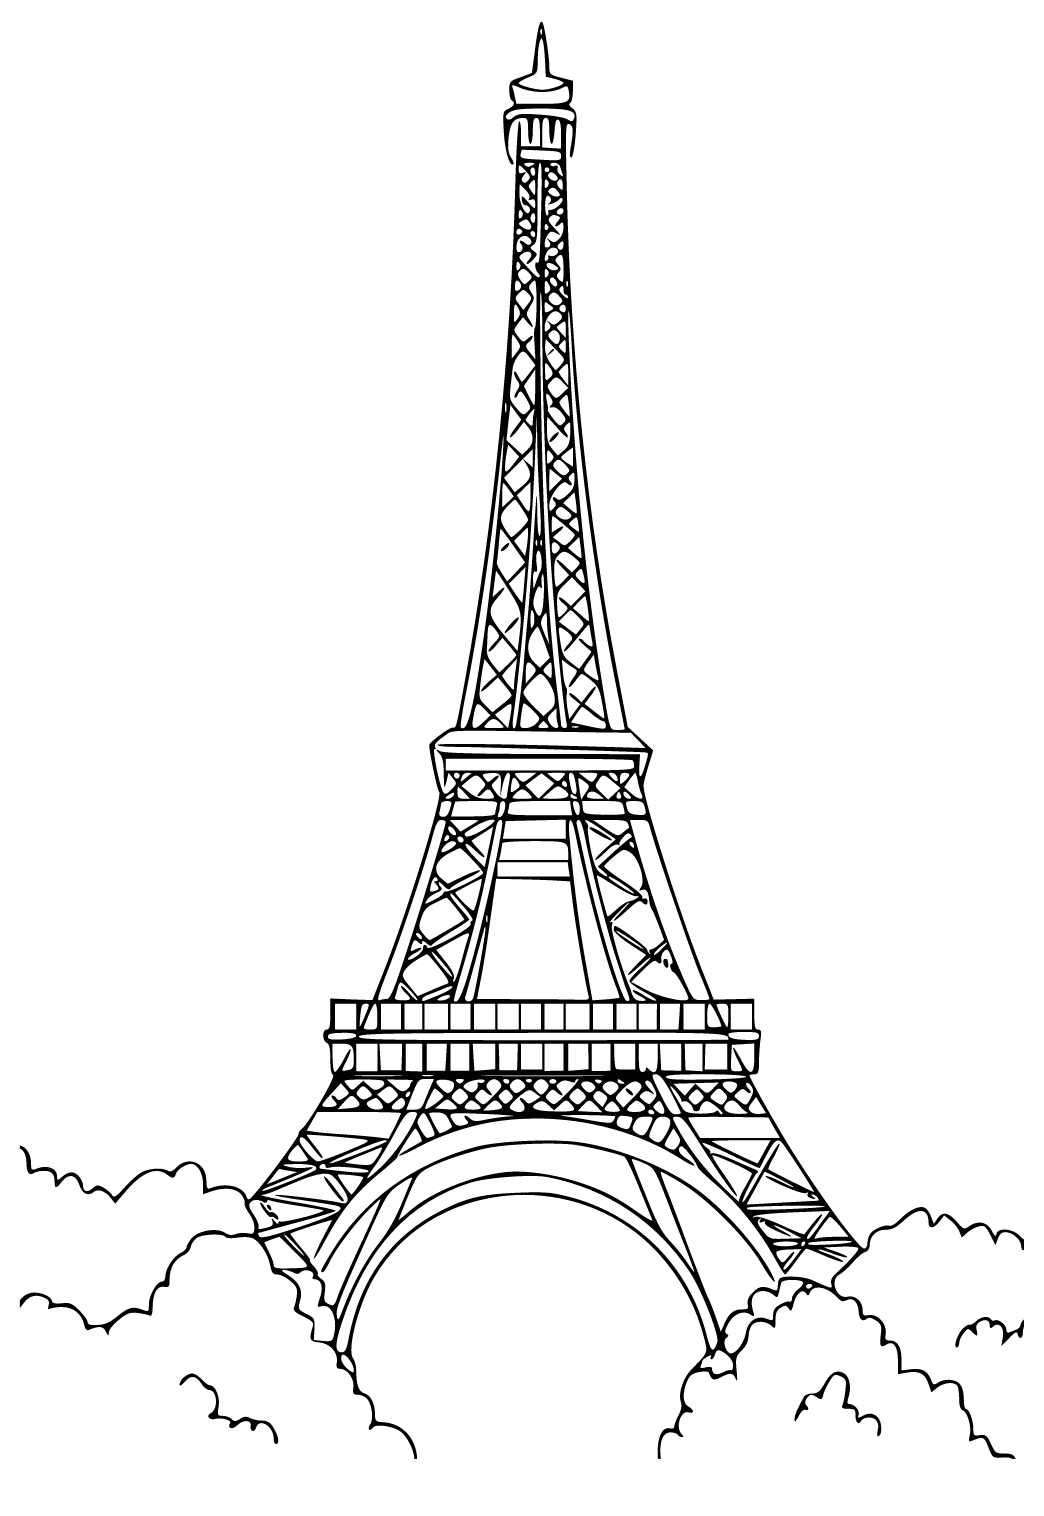 Free Printable Paris Tower Coloring Page for Adults and Kids - Lystok.com